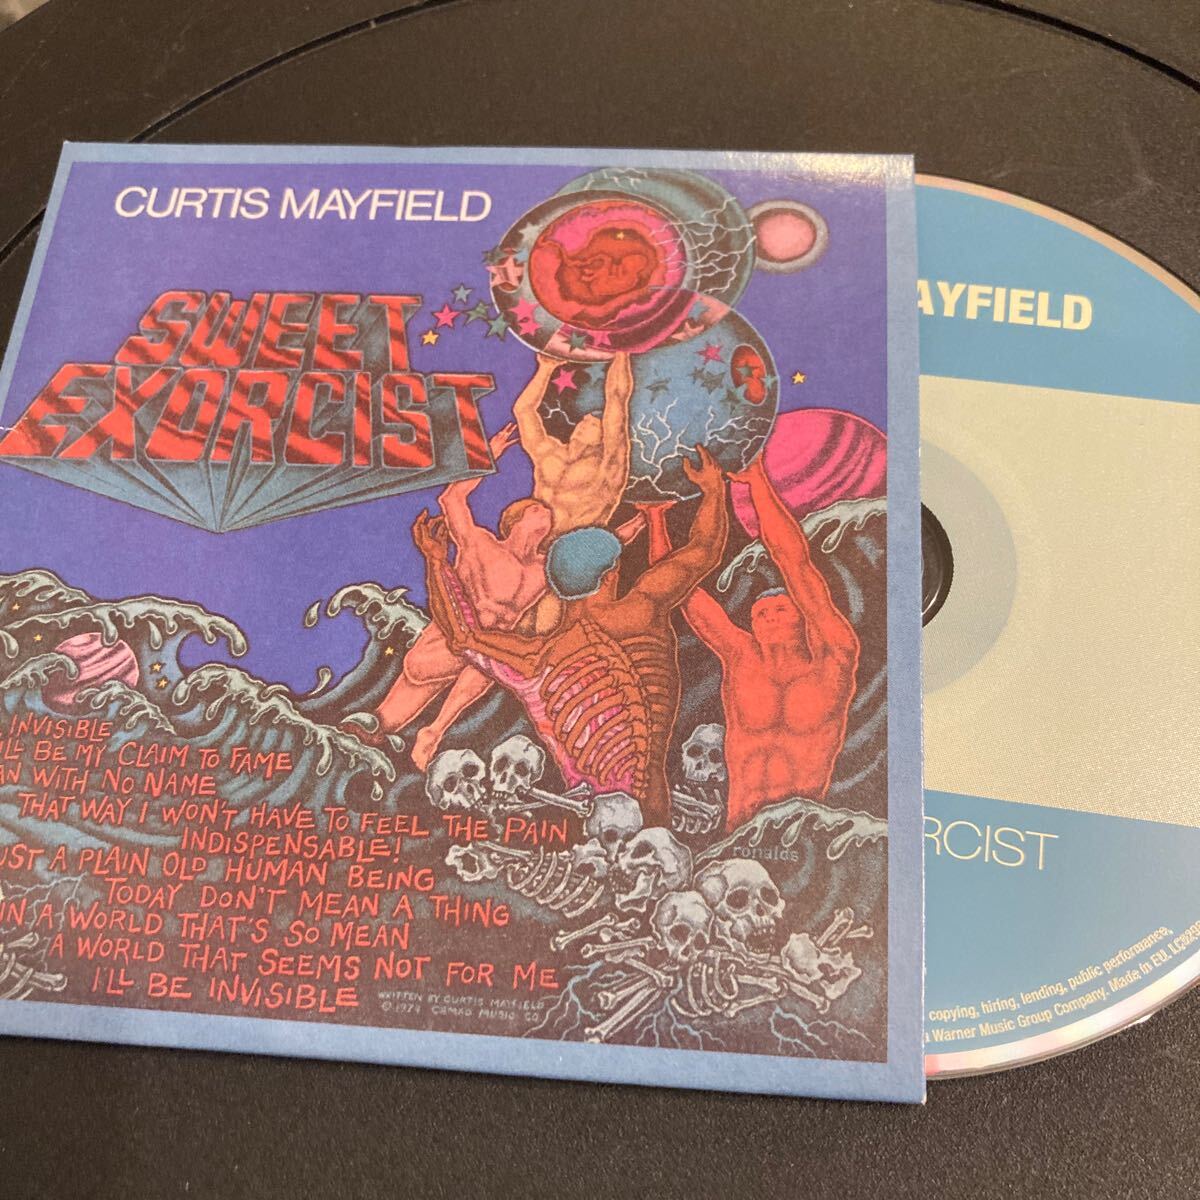 CURTIS MAYFIELD / ORIGINAL ALBUM SERIES 洋楽 SOUL 輸入盤 CD 紙ジャケット CURTIS/CURTIS LIVE/ROOTS/BACK TO THE WORLD/SWEET EXORCIST_画像5